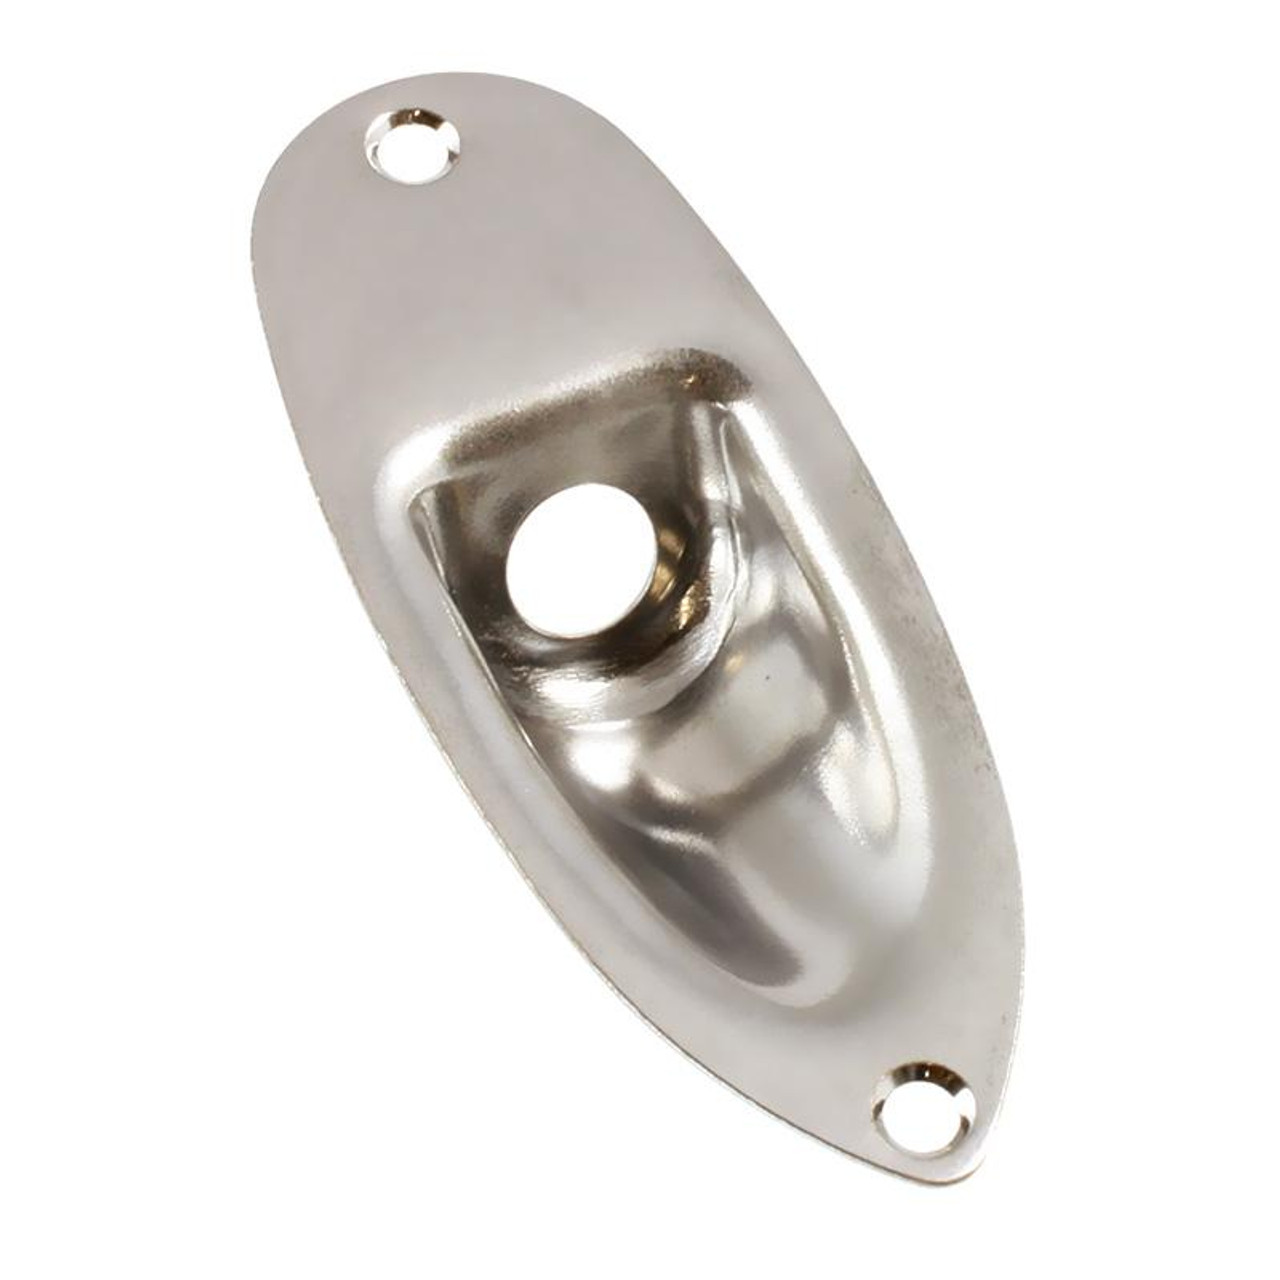 Gotoh Nickel Jackplate for Stratocaster with screws